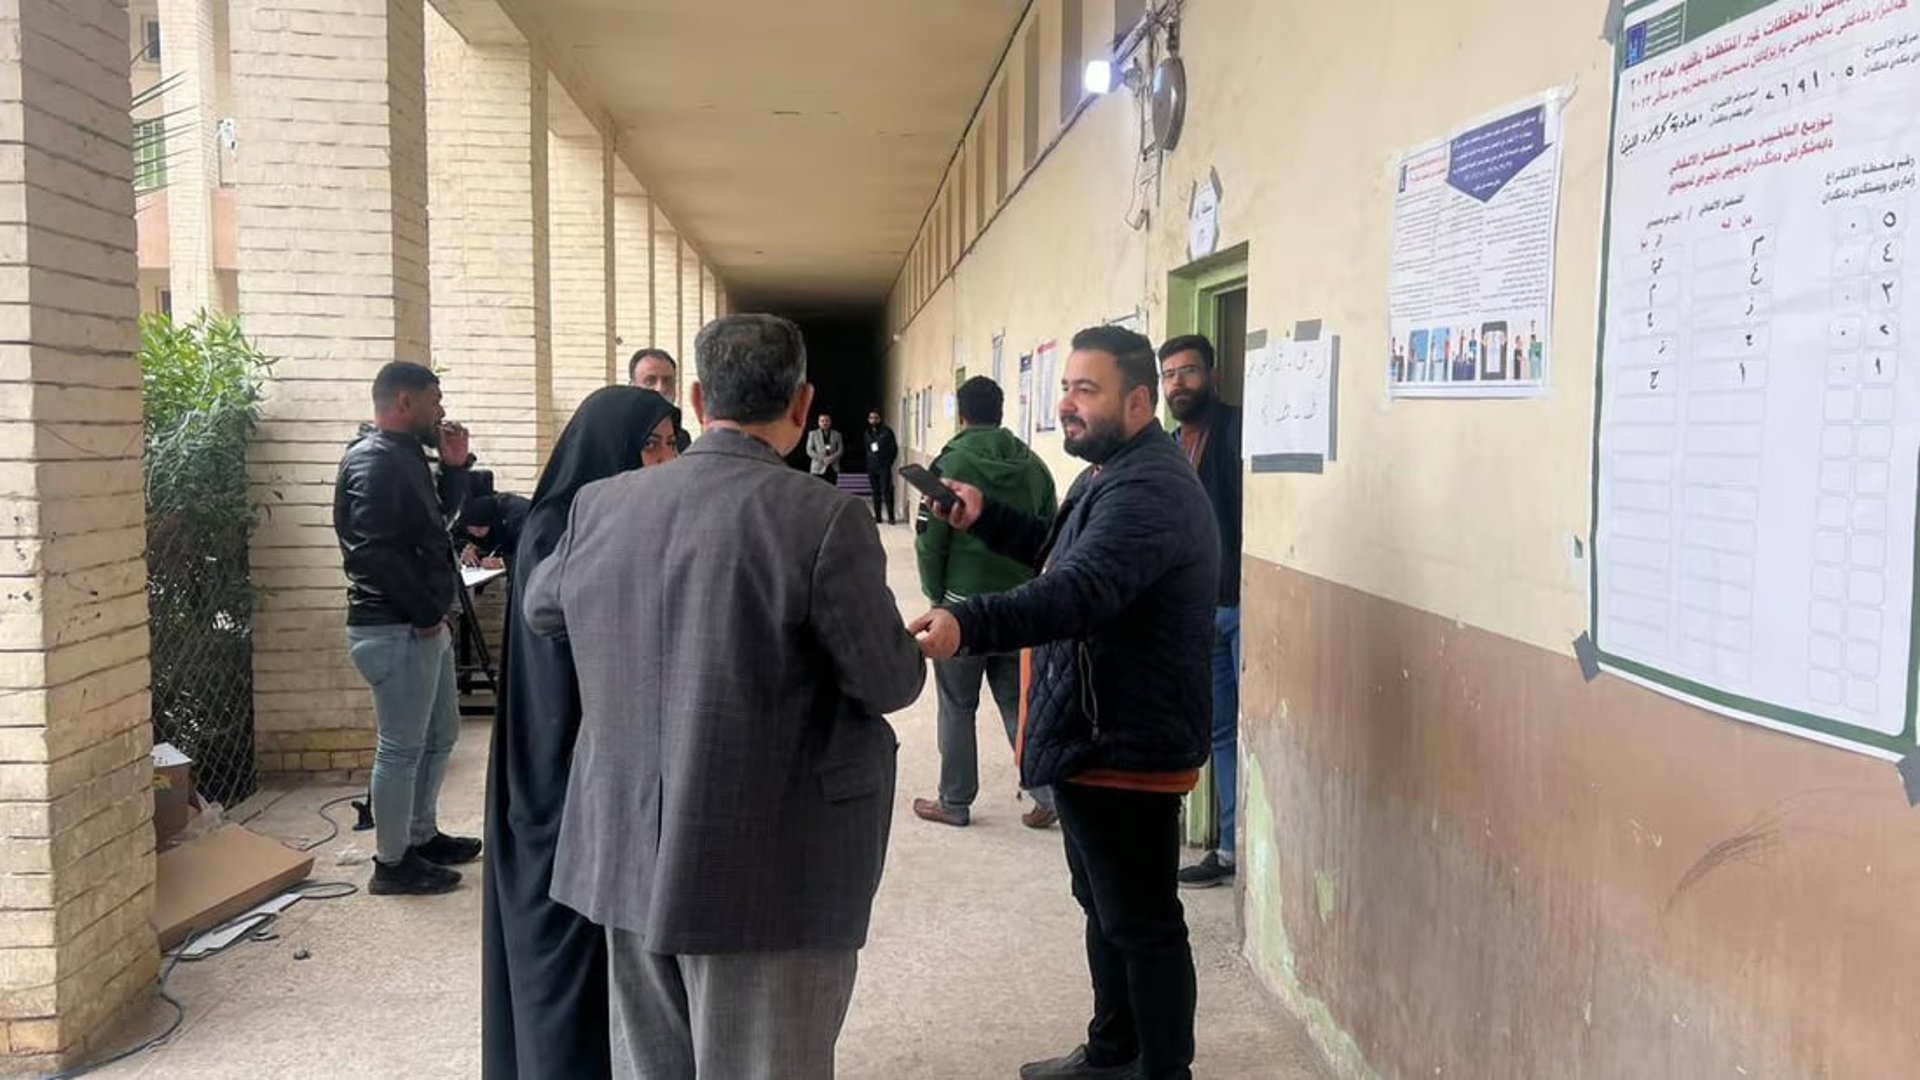 Karbala polling stations report  percent voter turnout at midday